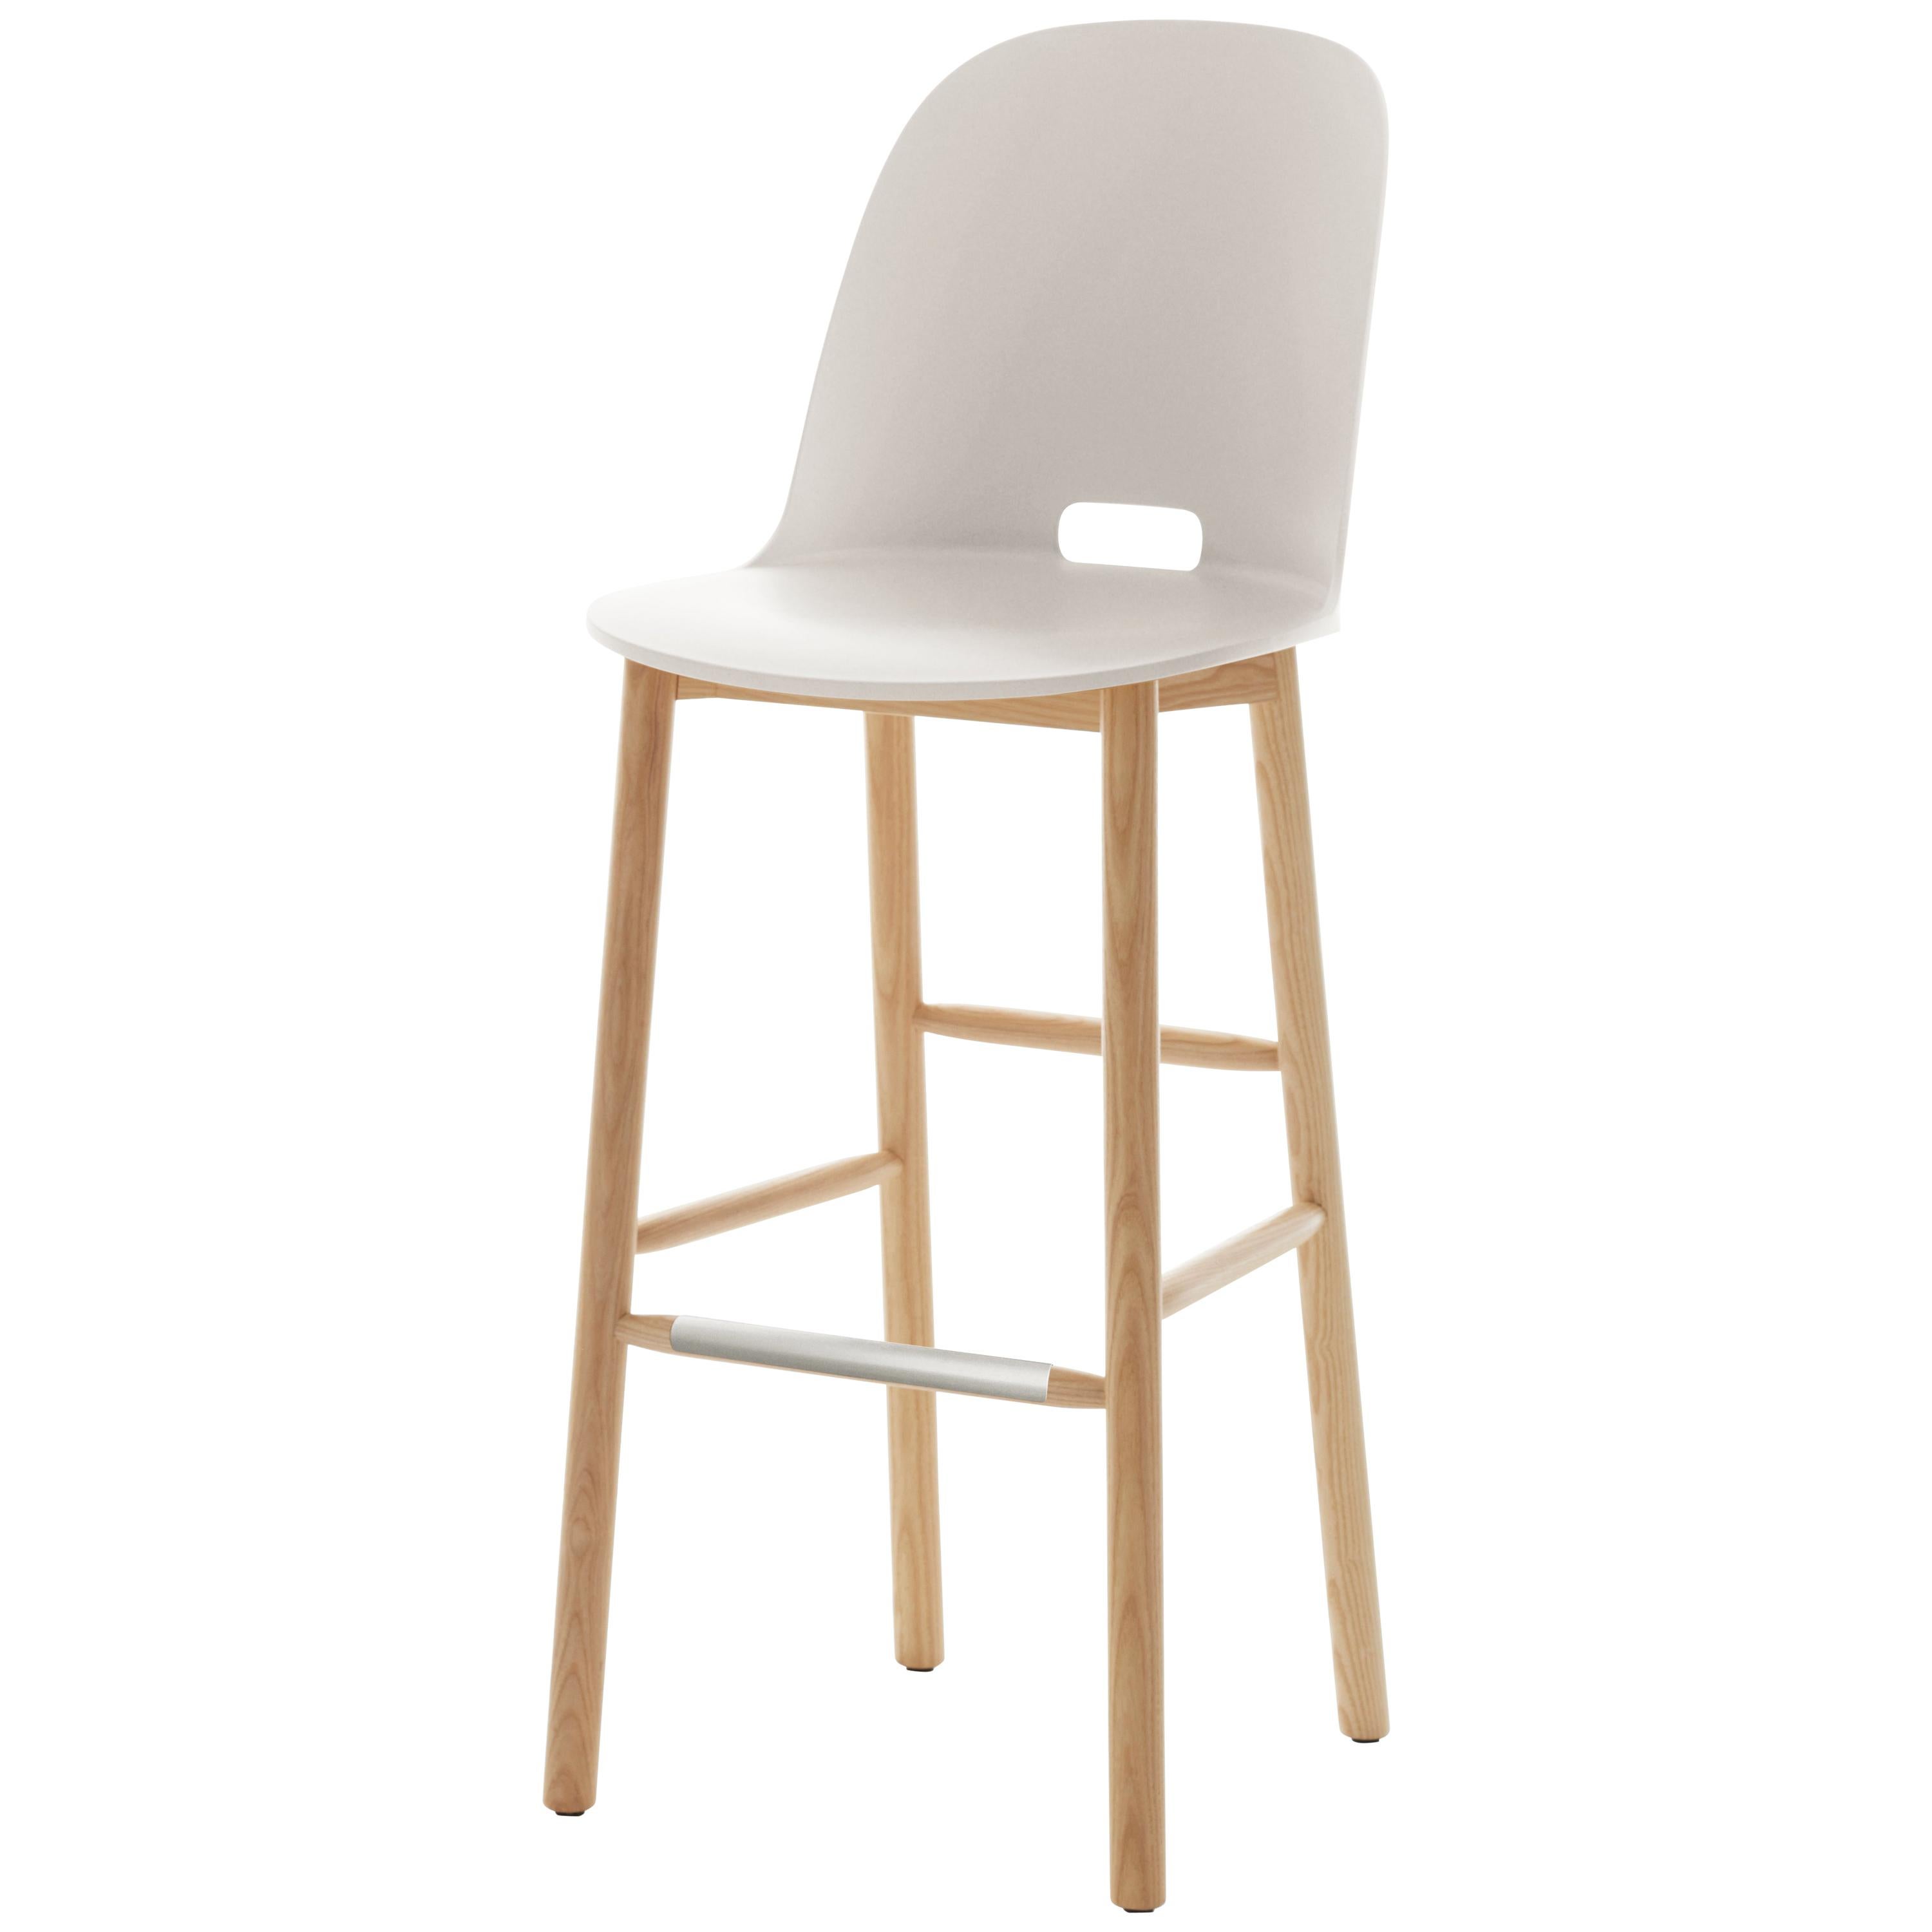 Emeco Alfi Barstool in White and Ash with High Back by Jasper Morrison